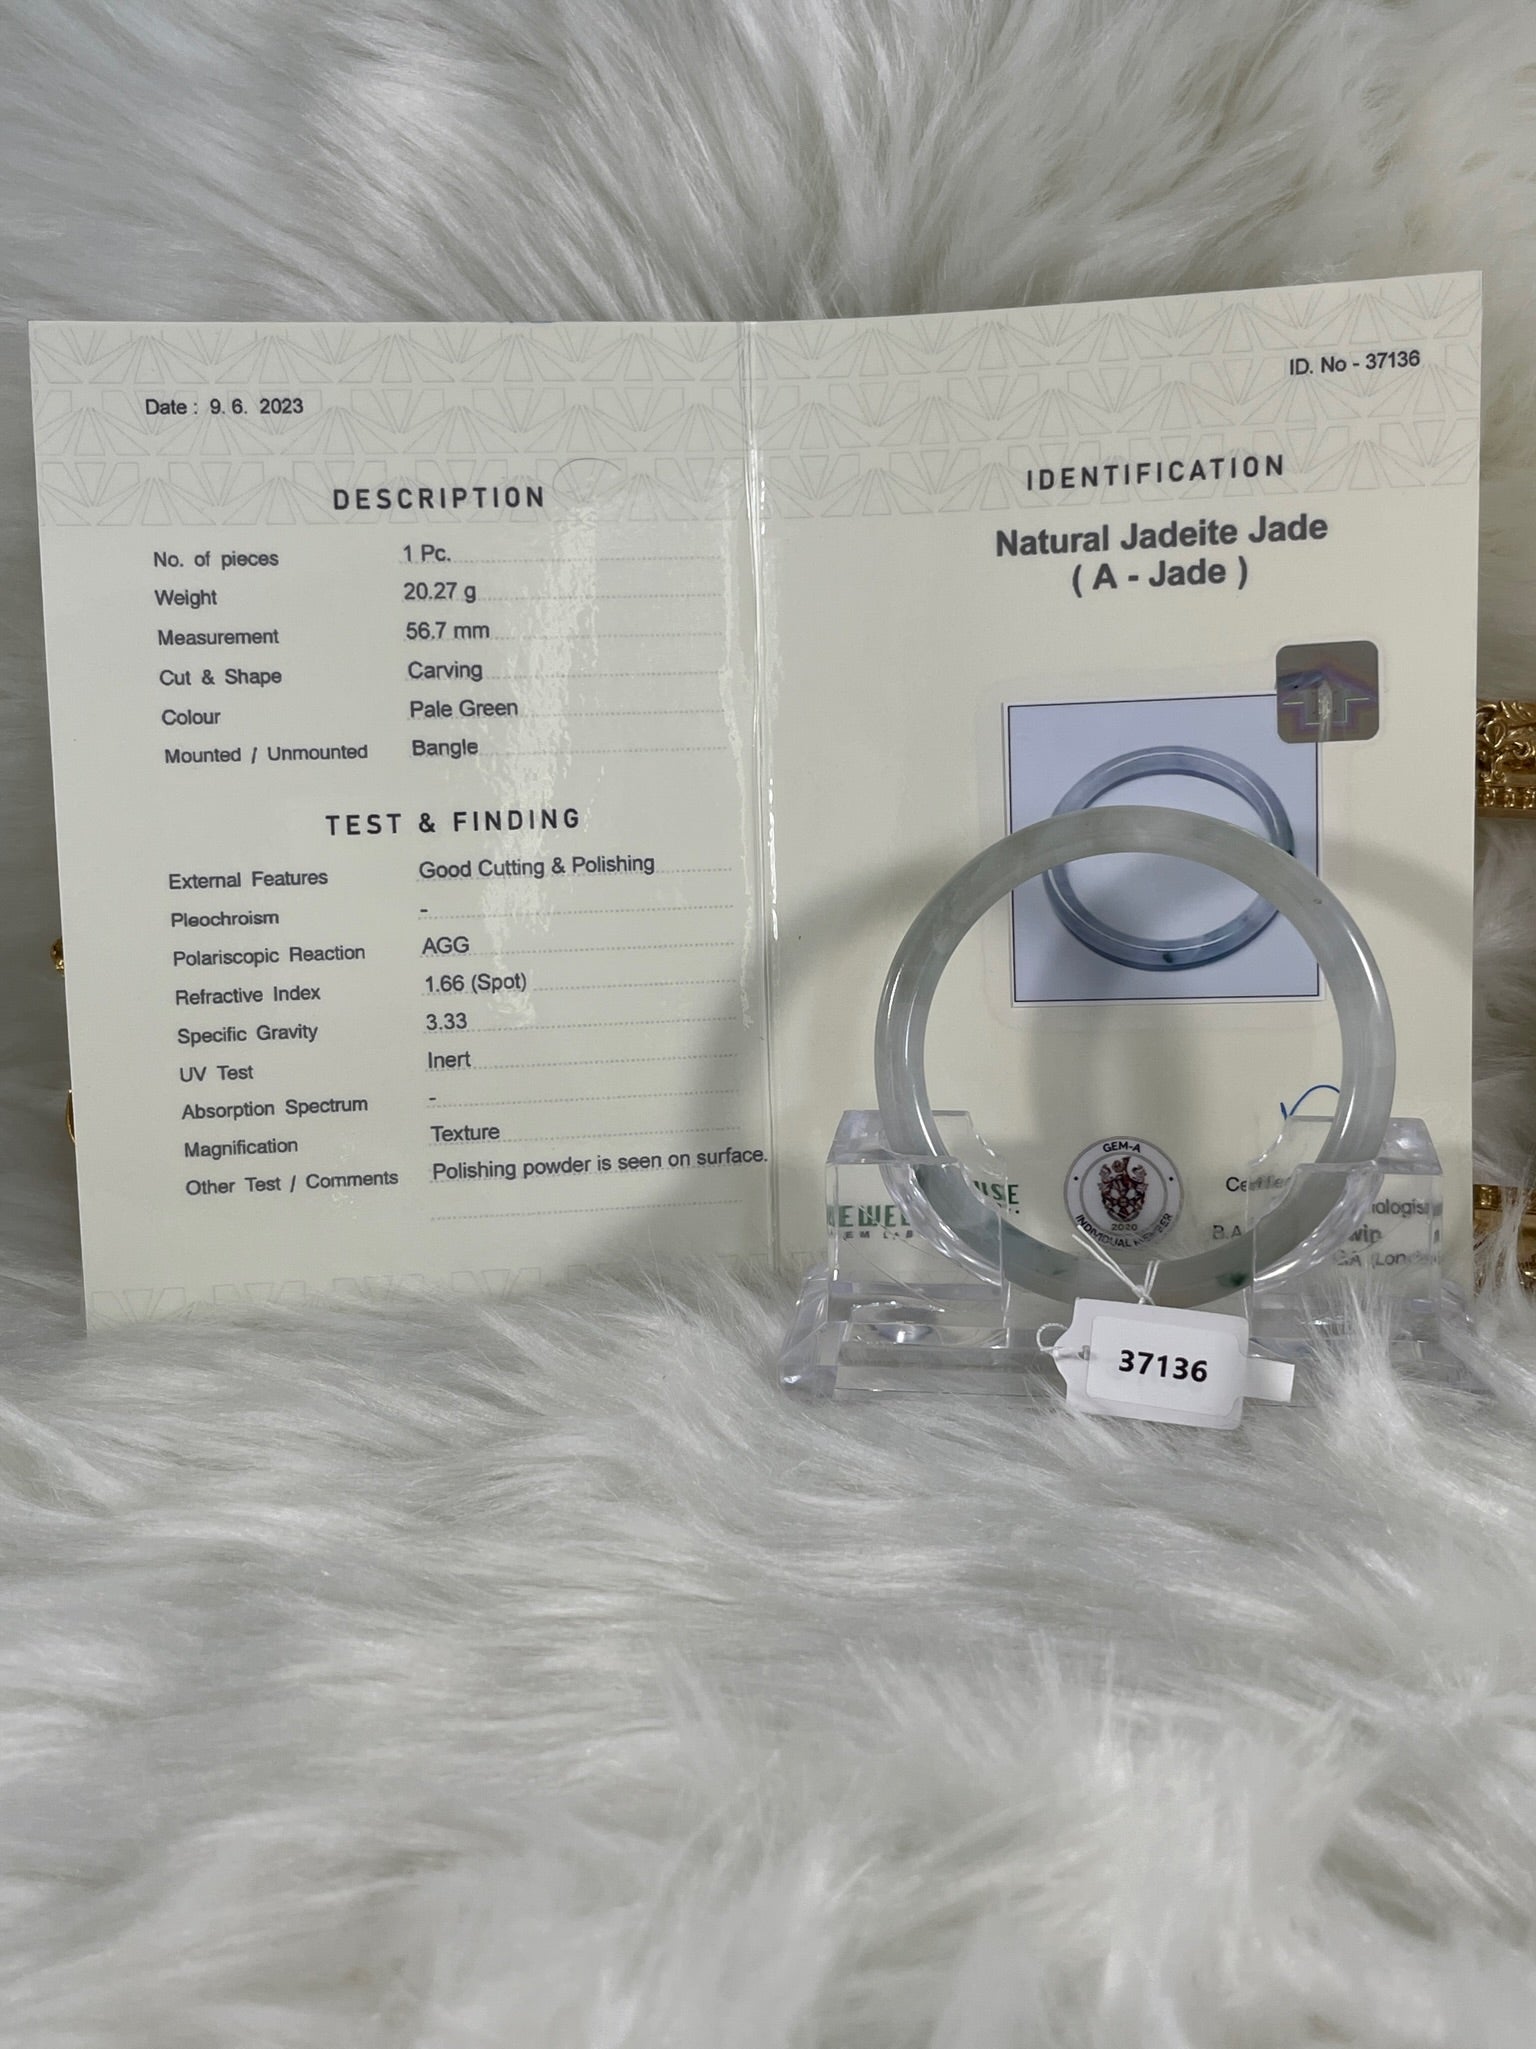 Grade A Natural Jade Bangle with certificate #37136